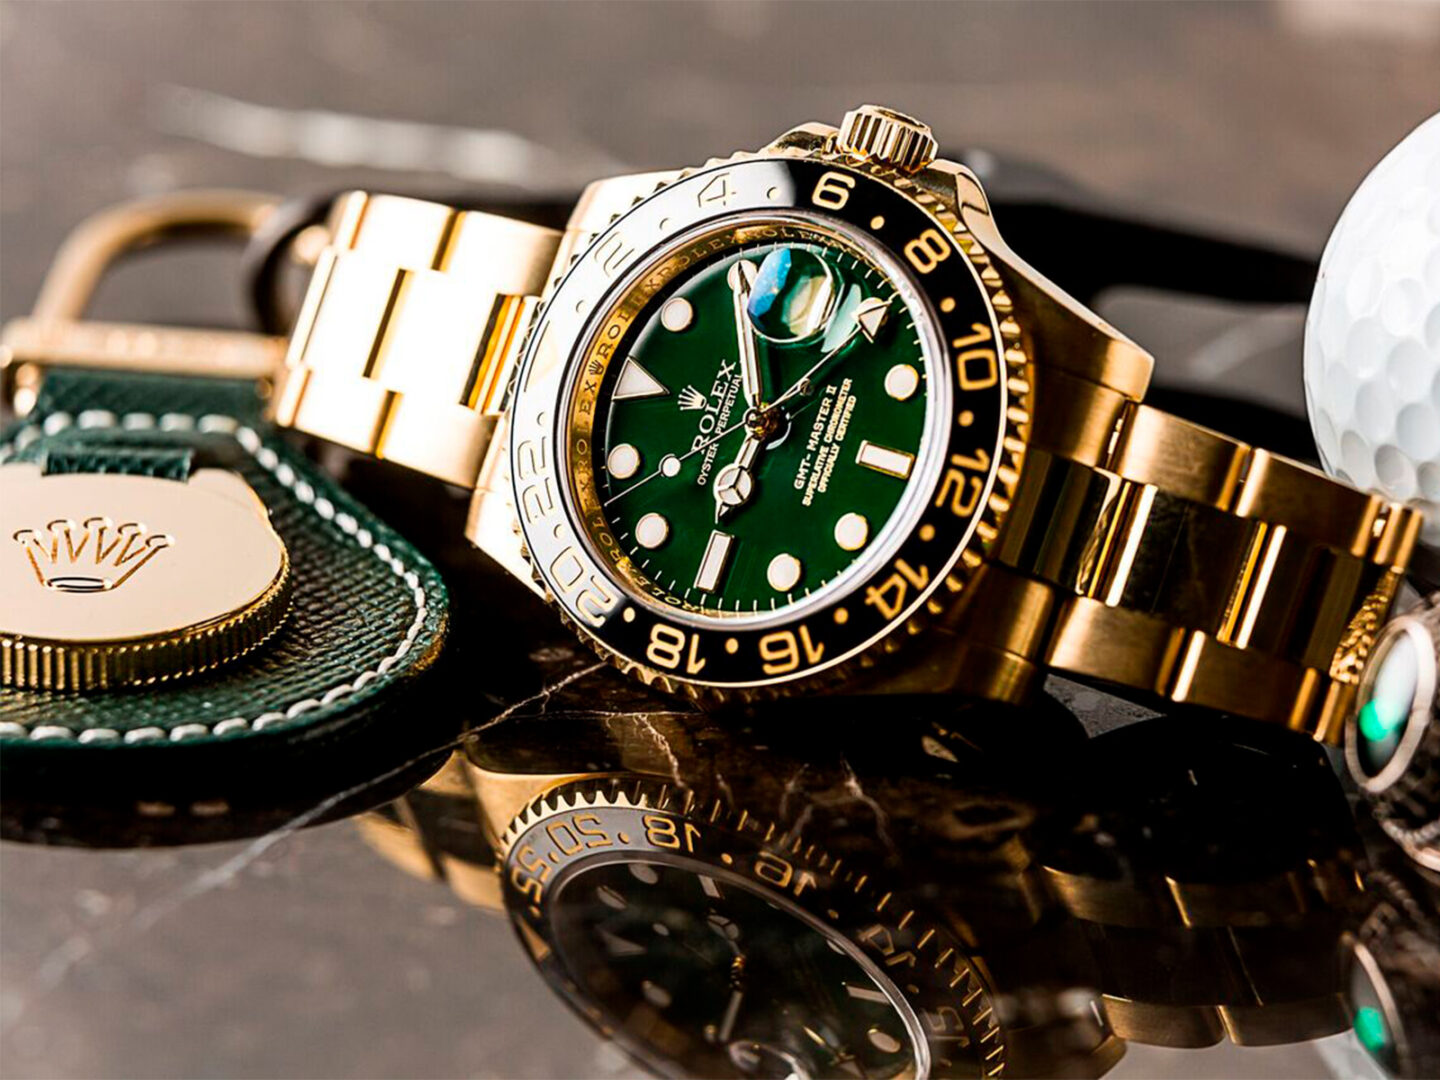 The price of Rolex watches continues to rise